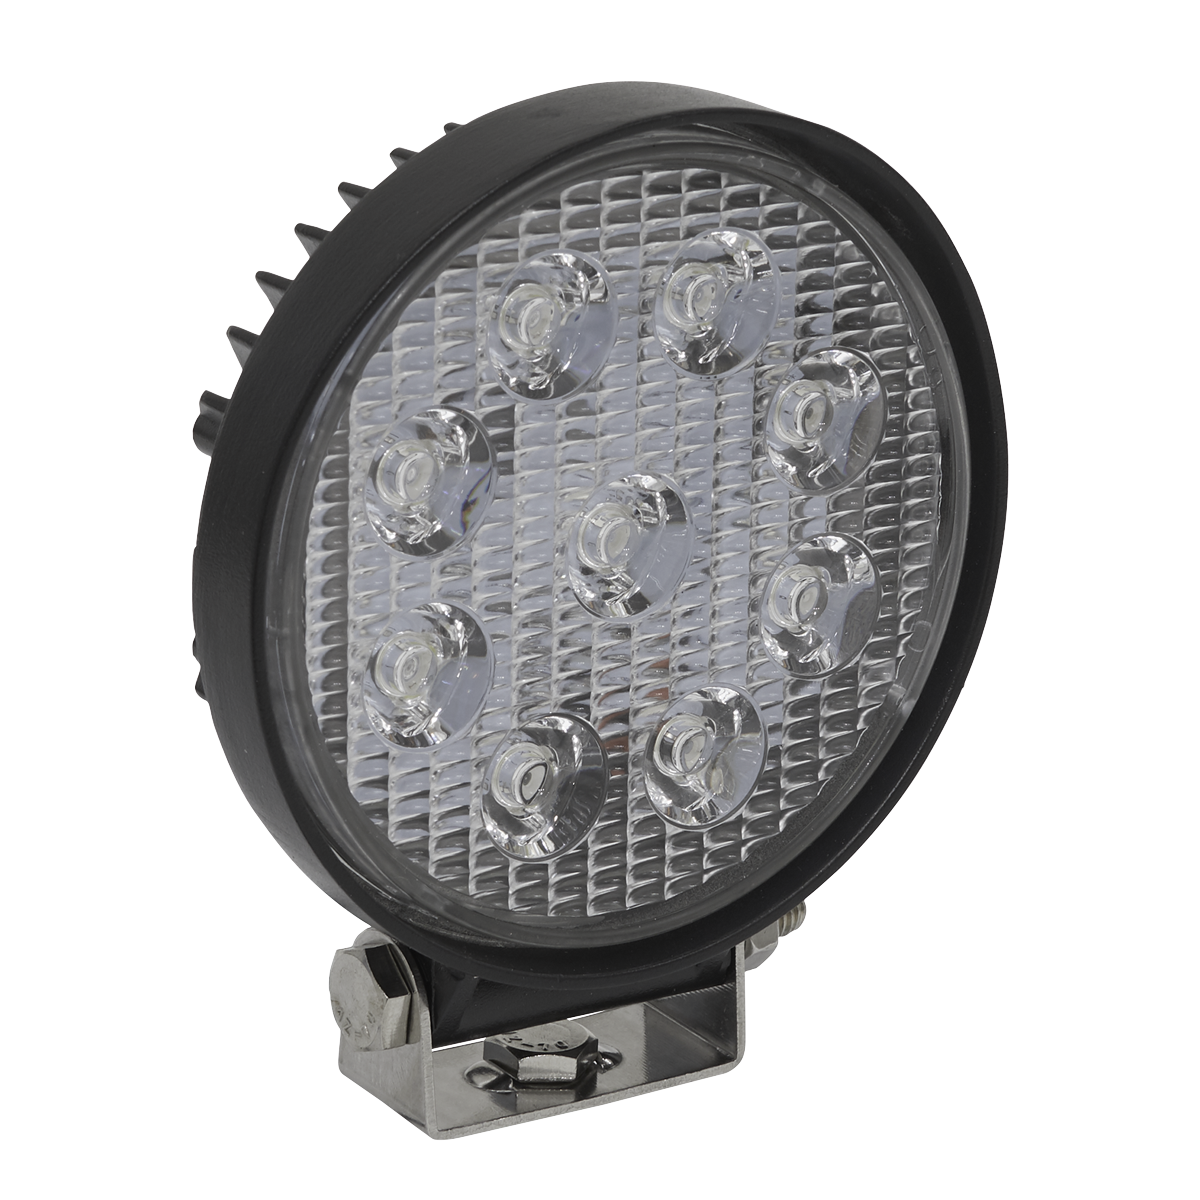 Round Worklight with Mounting Bracket 27W SMD LED - LED3R - Farming Parts